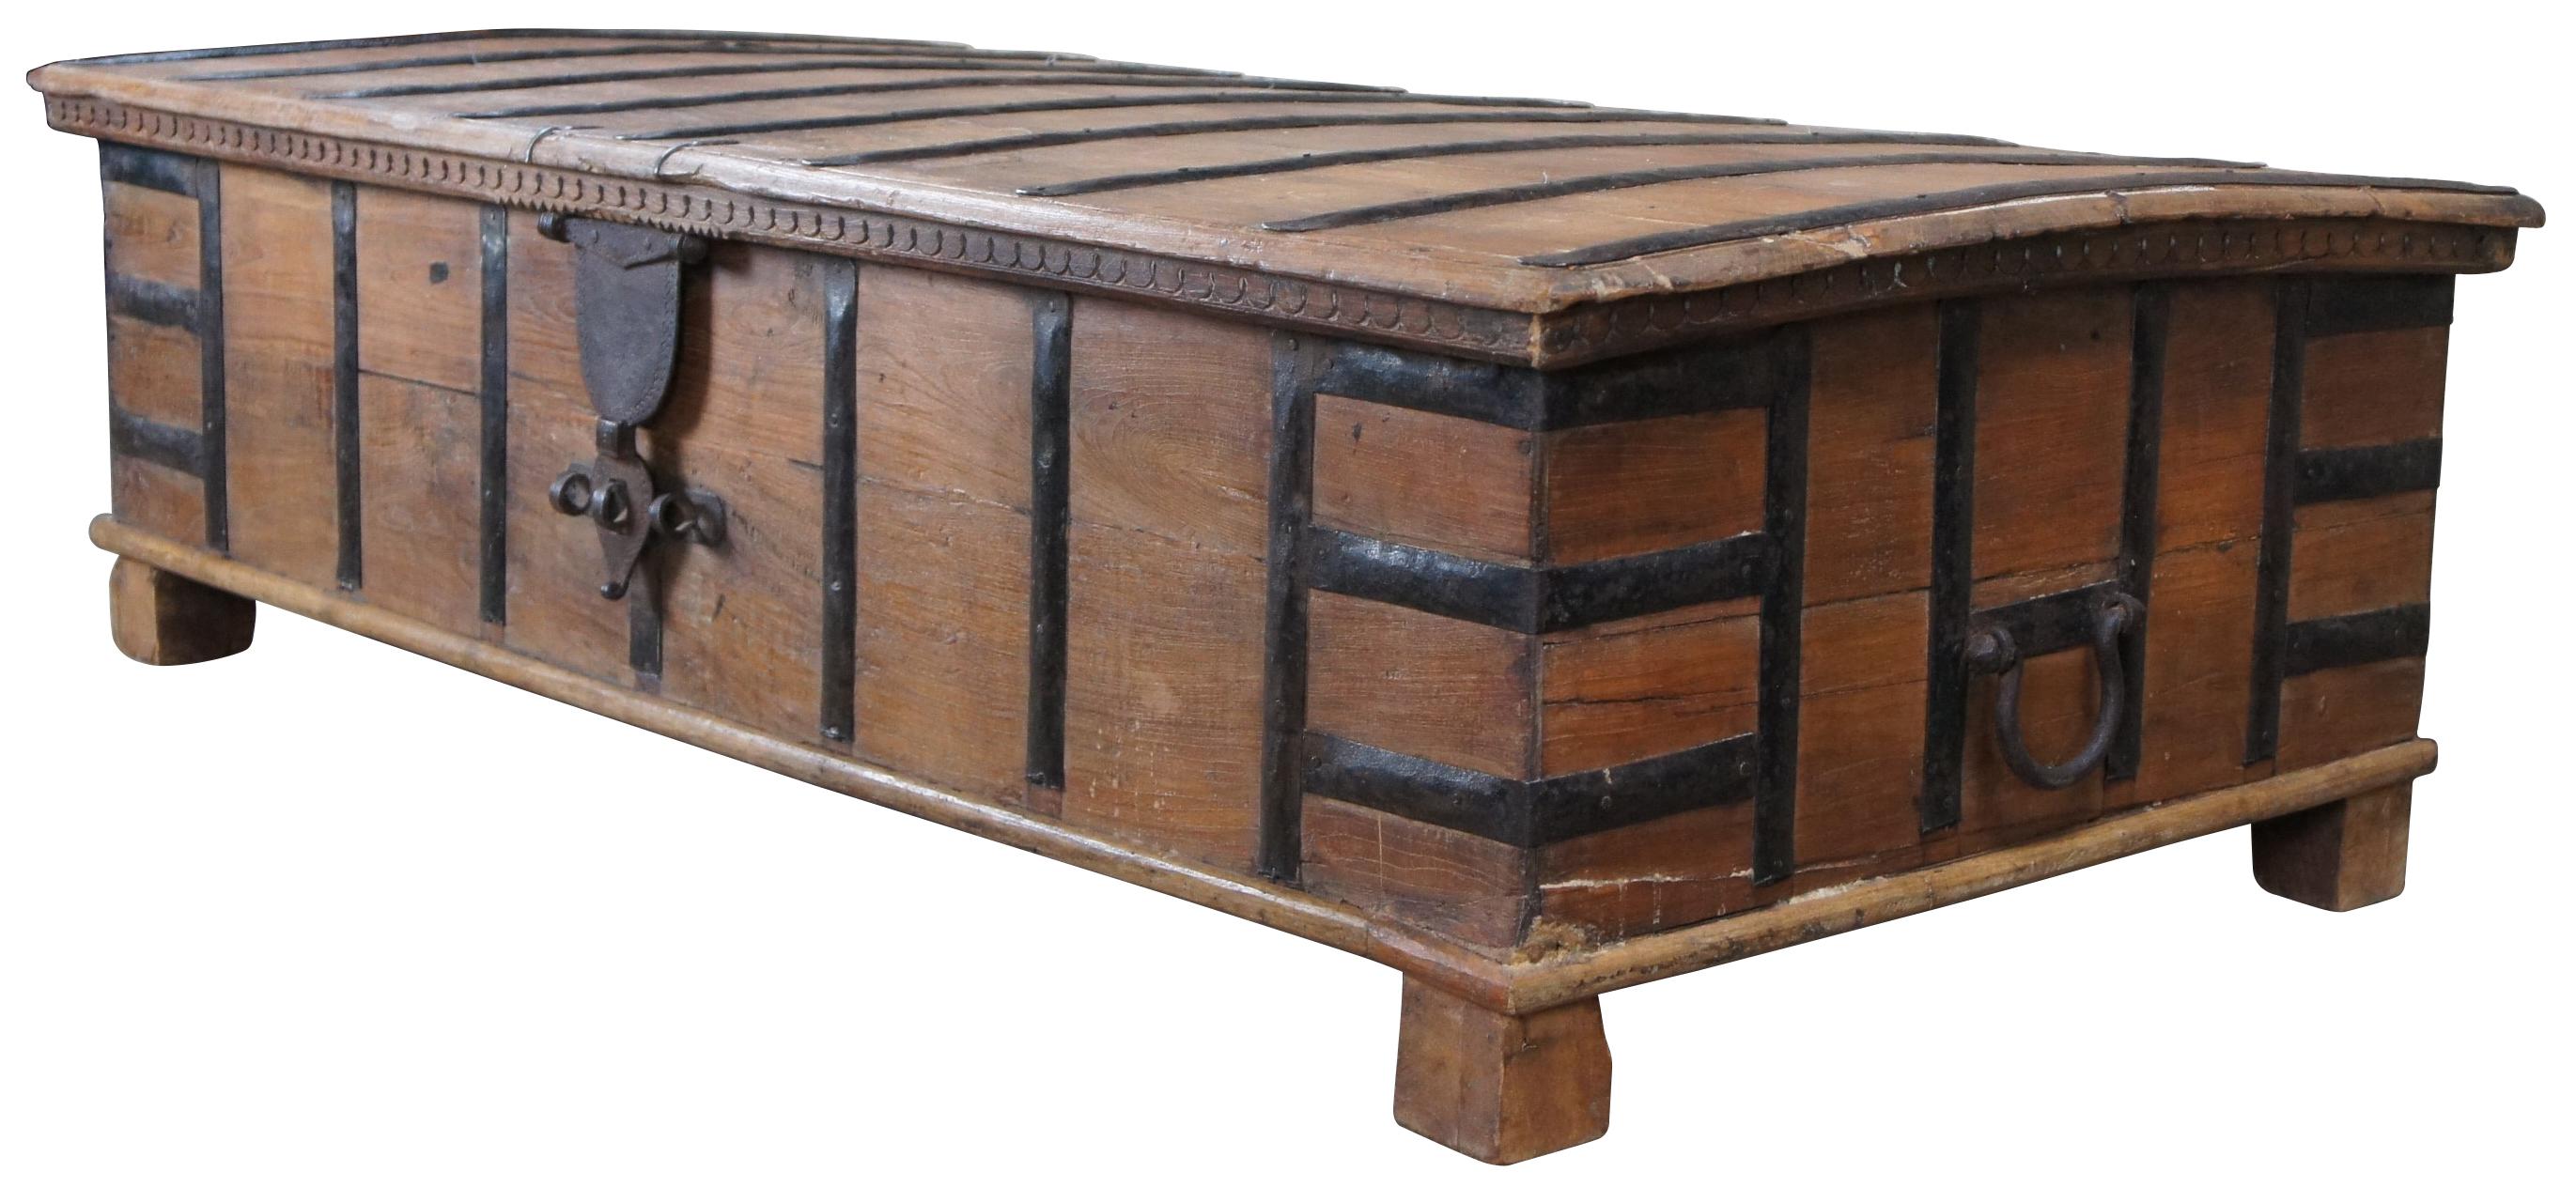 Beautifully detailed 20th century Anglo-Indian storage trunk coffee or cocktail table.  A rectangular form made from reclaimed teak with iron banding.  The top shocases a slight dome top with a carved apron.  Includes ornate latching and handles